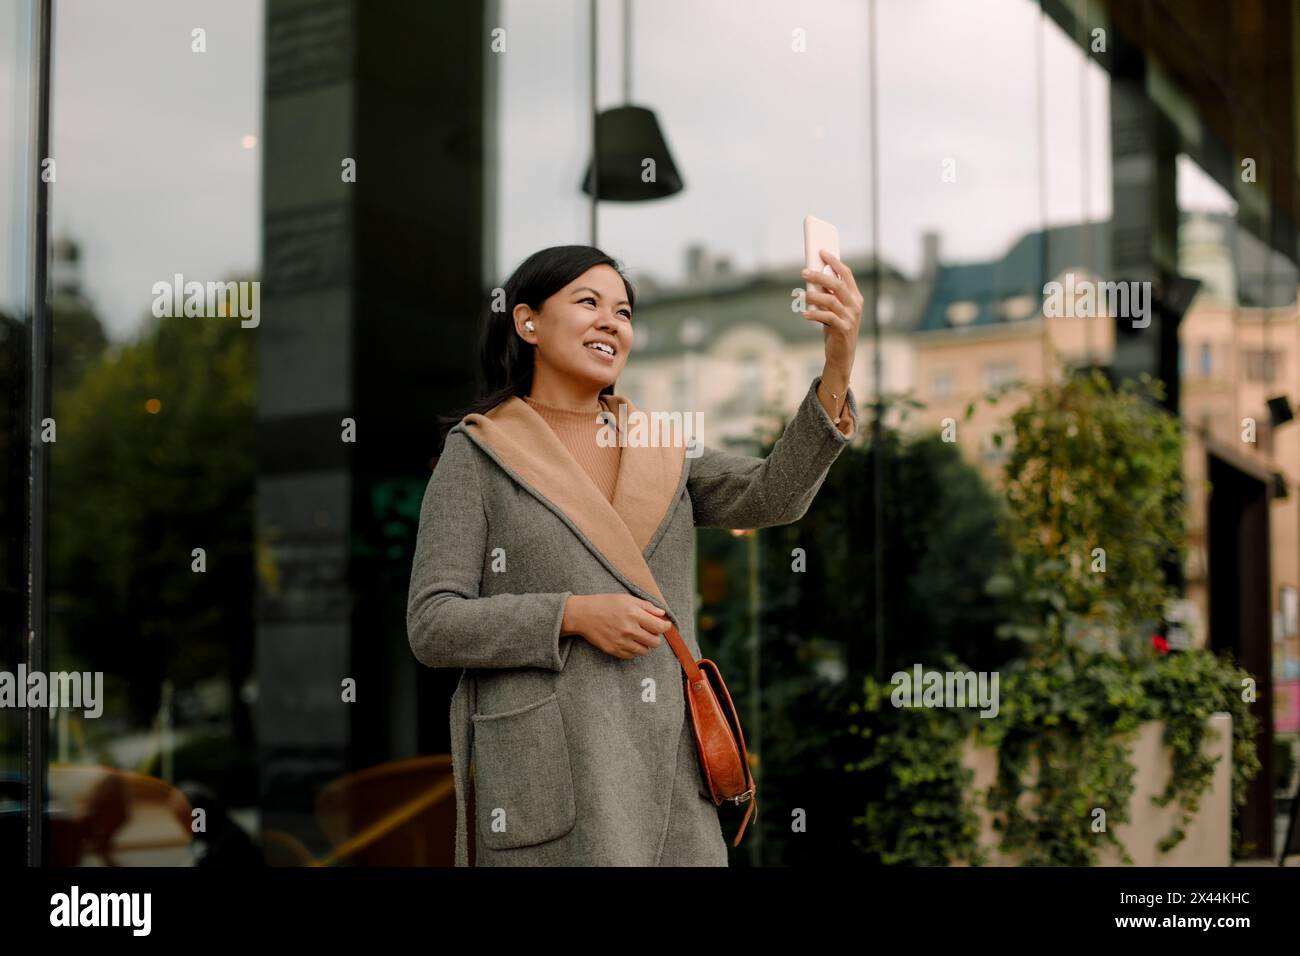 Smiling businesswoman on video call using smart phone while standing against glass building Stock Photo